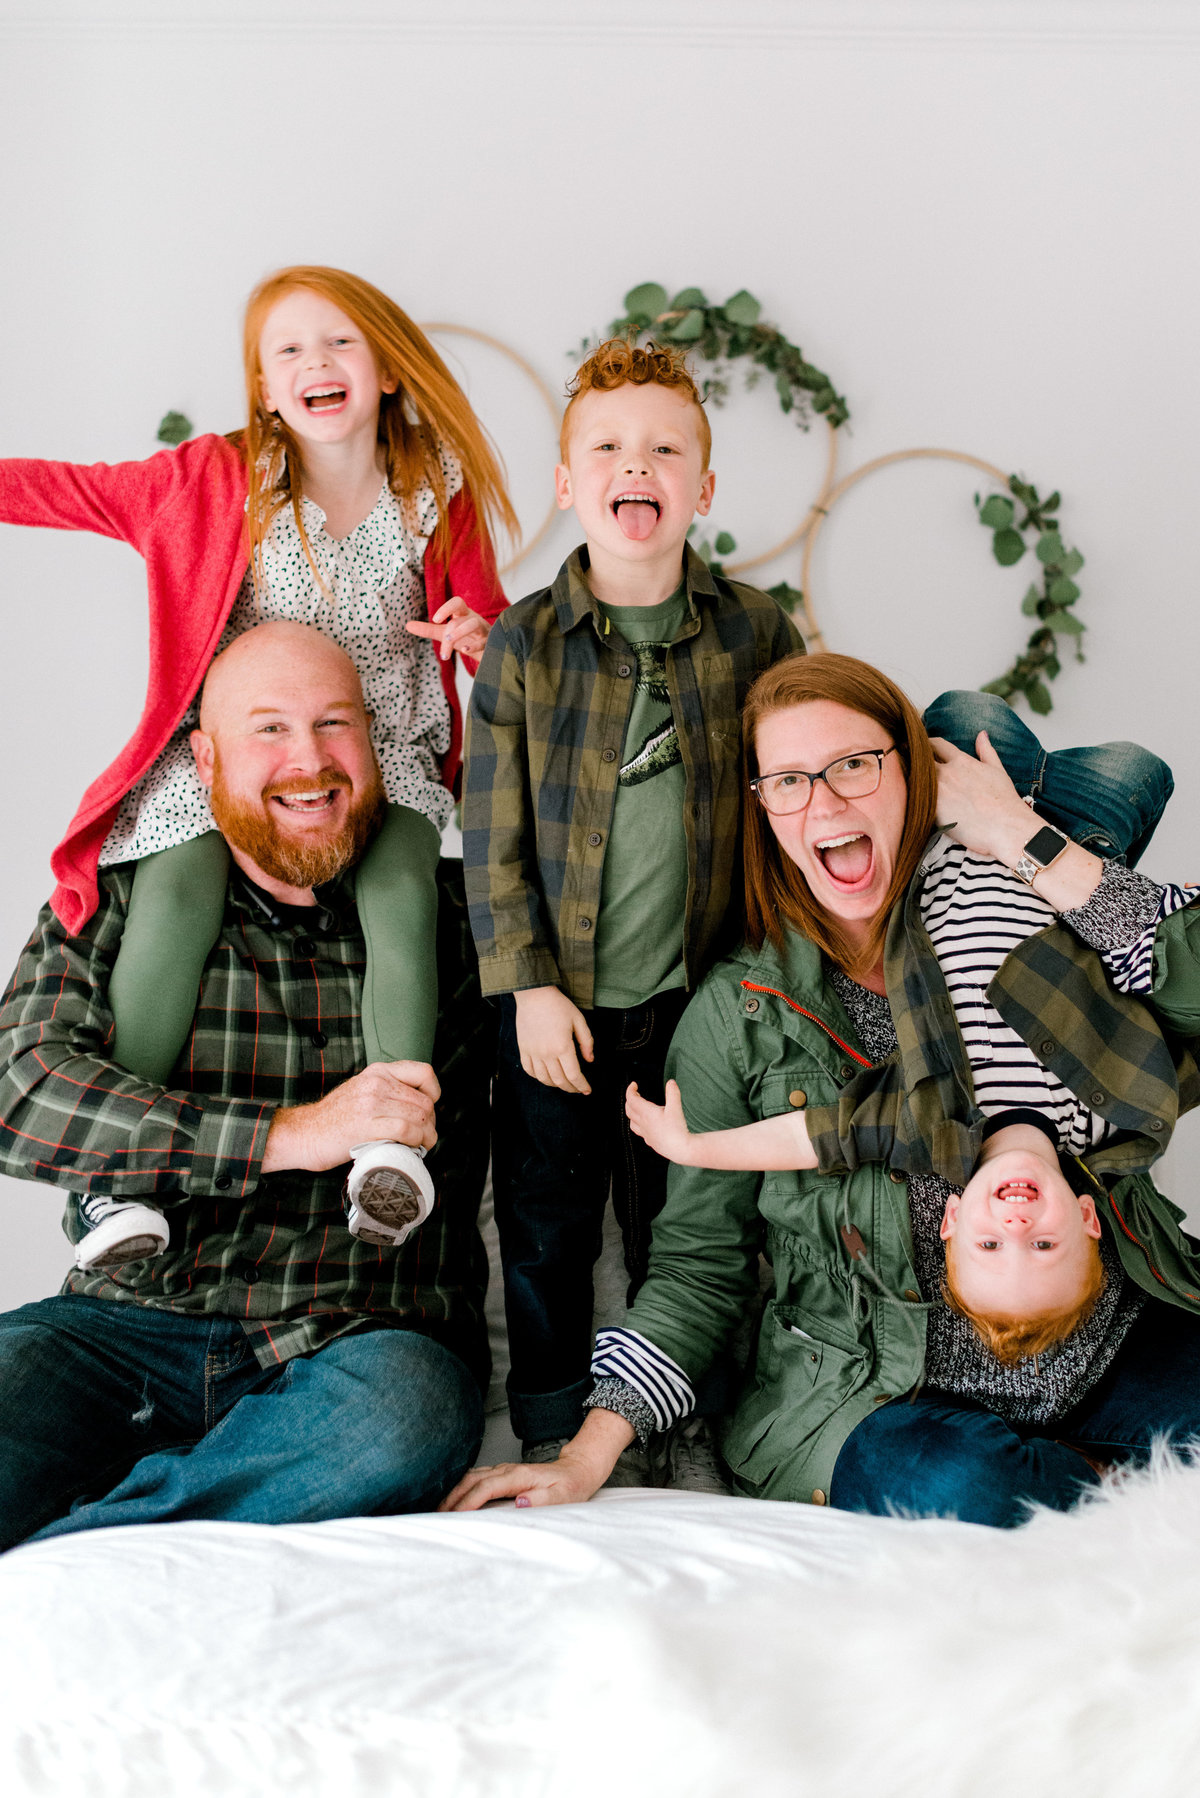 OwensbyFamily_HolidayMiniSession_SneakPeek_BeccaBPhotography-2